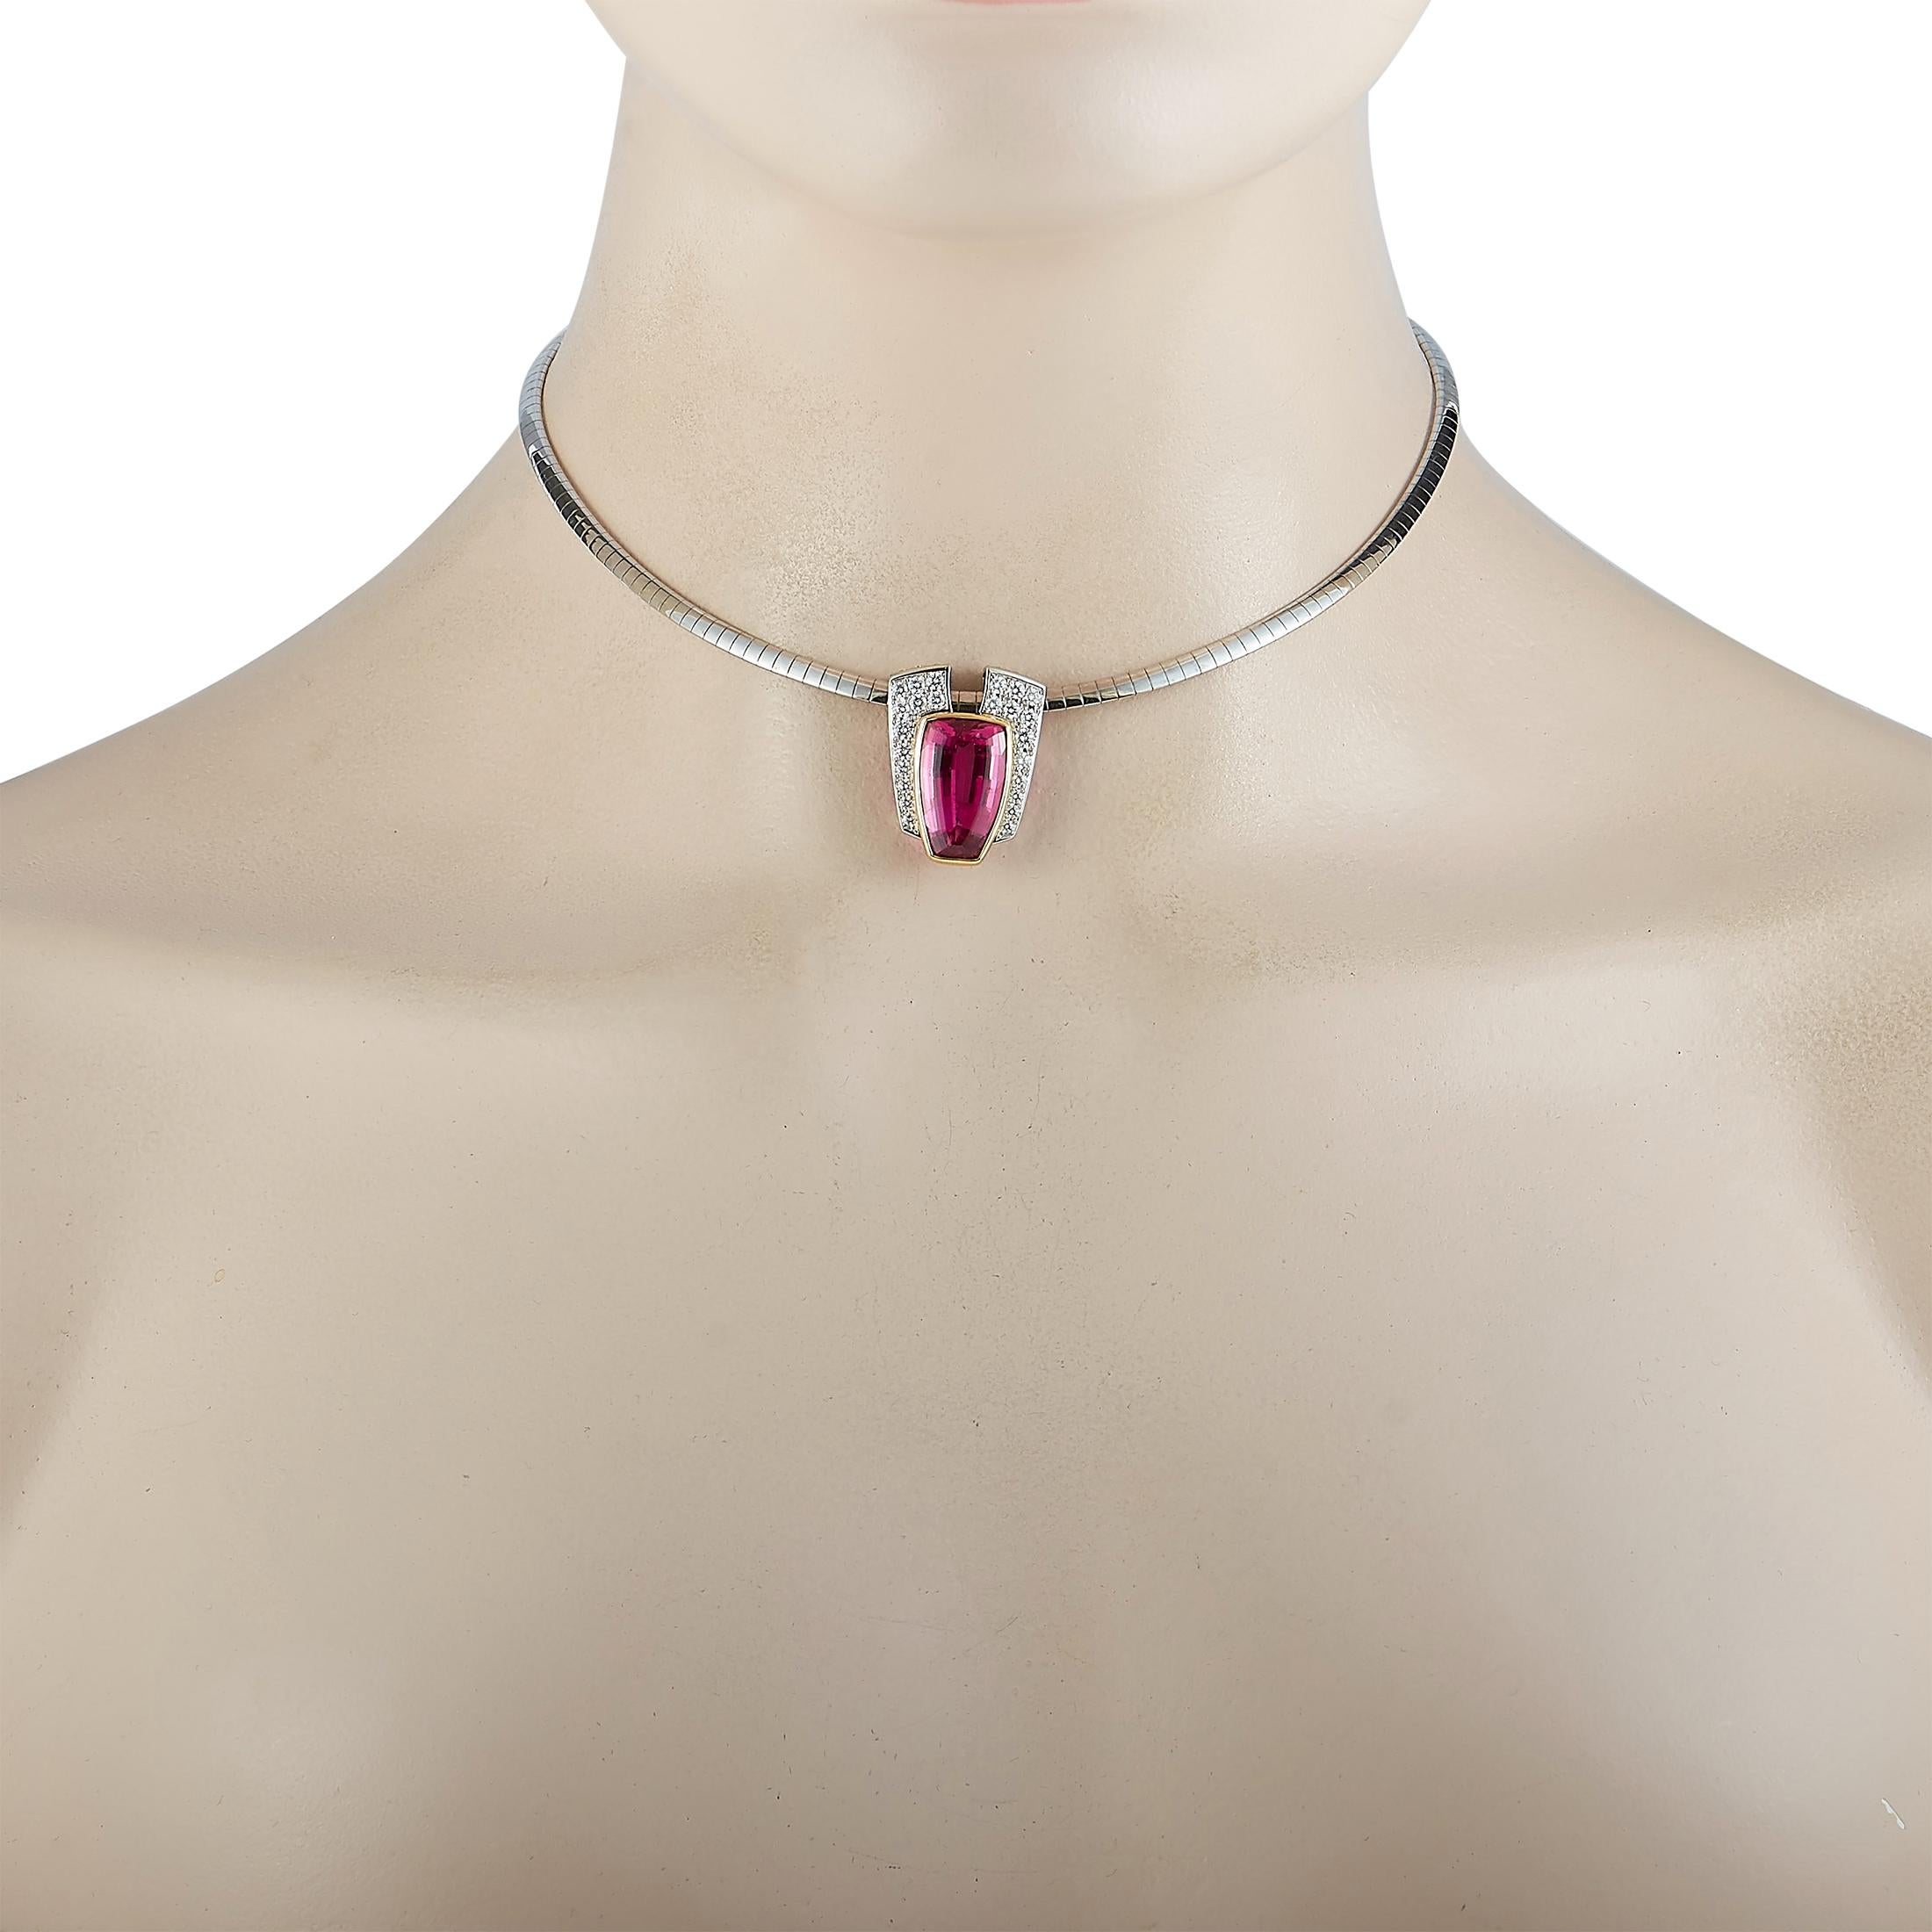 This LB Exclusive necklace is made out of platinum and 18K yellow gold and embellished with a 12.85 ct tourmaline and a total of 1.09 carats of diamonds. The necklace weighs 27.9 grams and boasts a 15” chain and a pendant that measures 1” in length